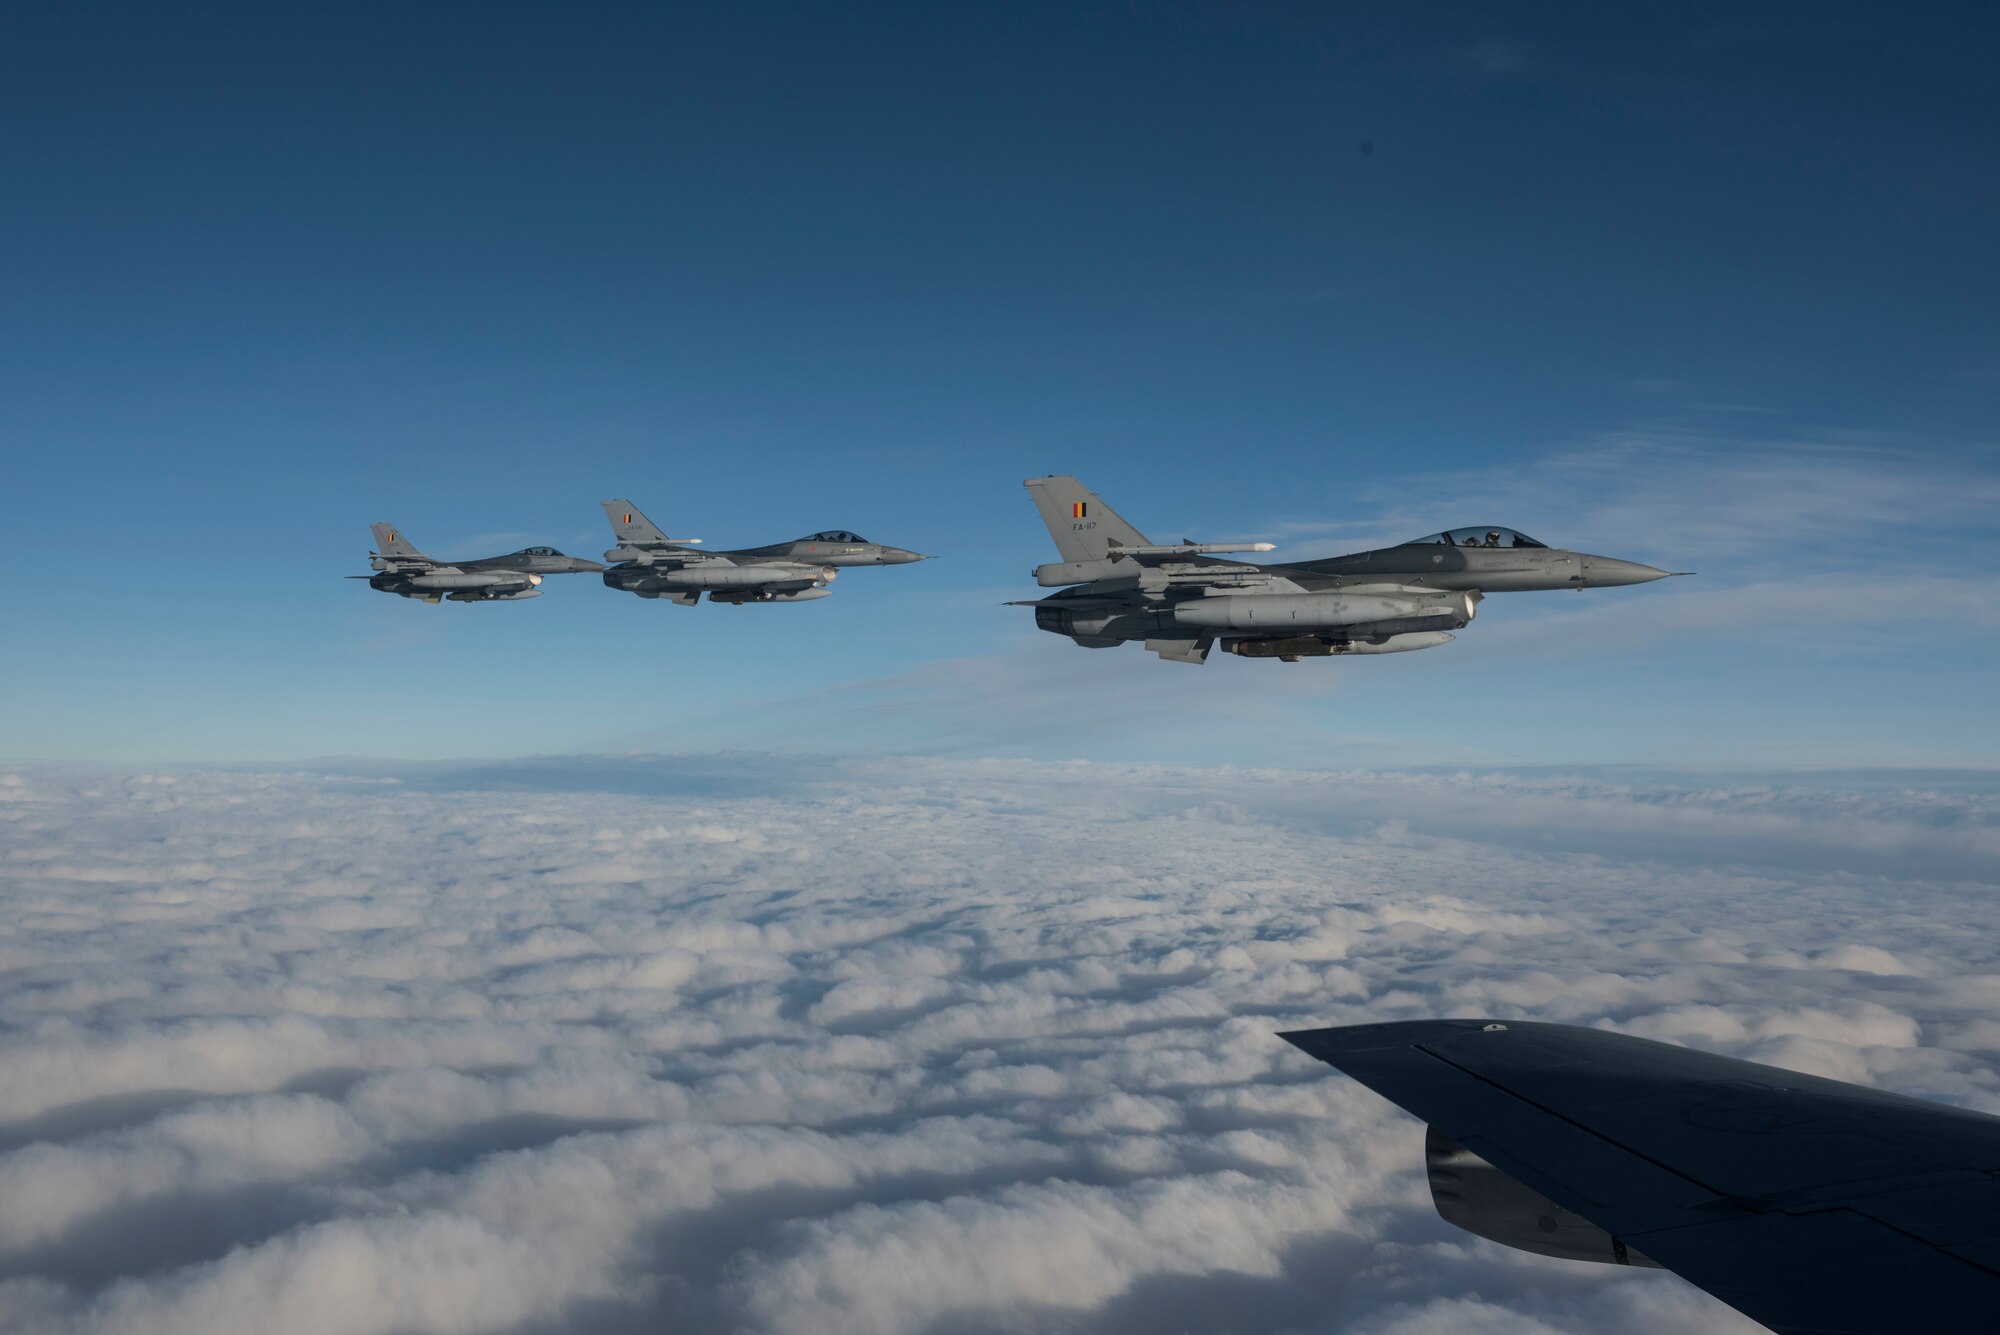 Three Belgian F-16 Fighting Falcons fly alongside a U.S. Air Force KC-135 Stratotanker during Exercise Trident Juncture 18, in Swedish airspace, Oct. 30, 2018. The NATO-led exercise includes 31 countries and provides unique opportunities to train with NATO allies and partners. (U.S. Air Force photo by Senior Airman Luke Milano)